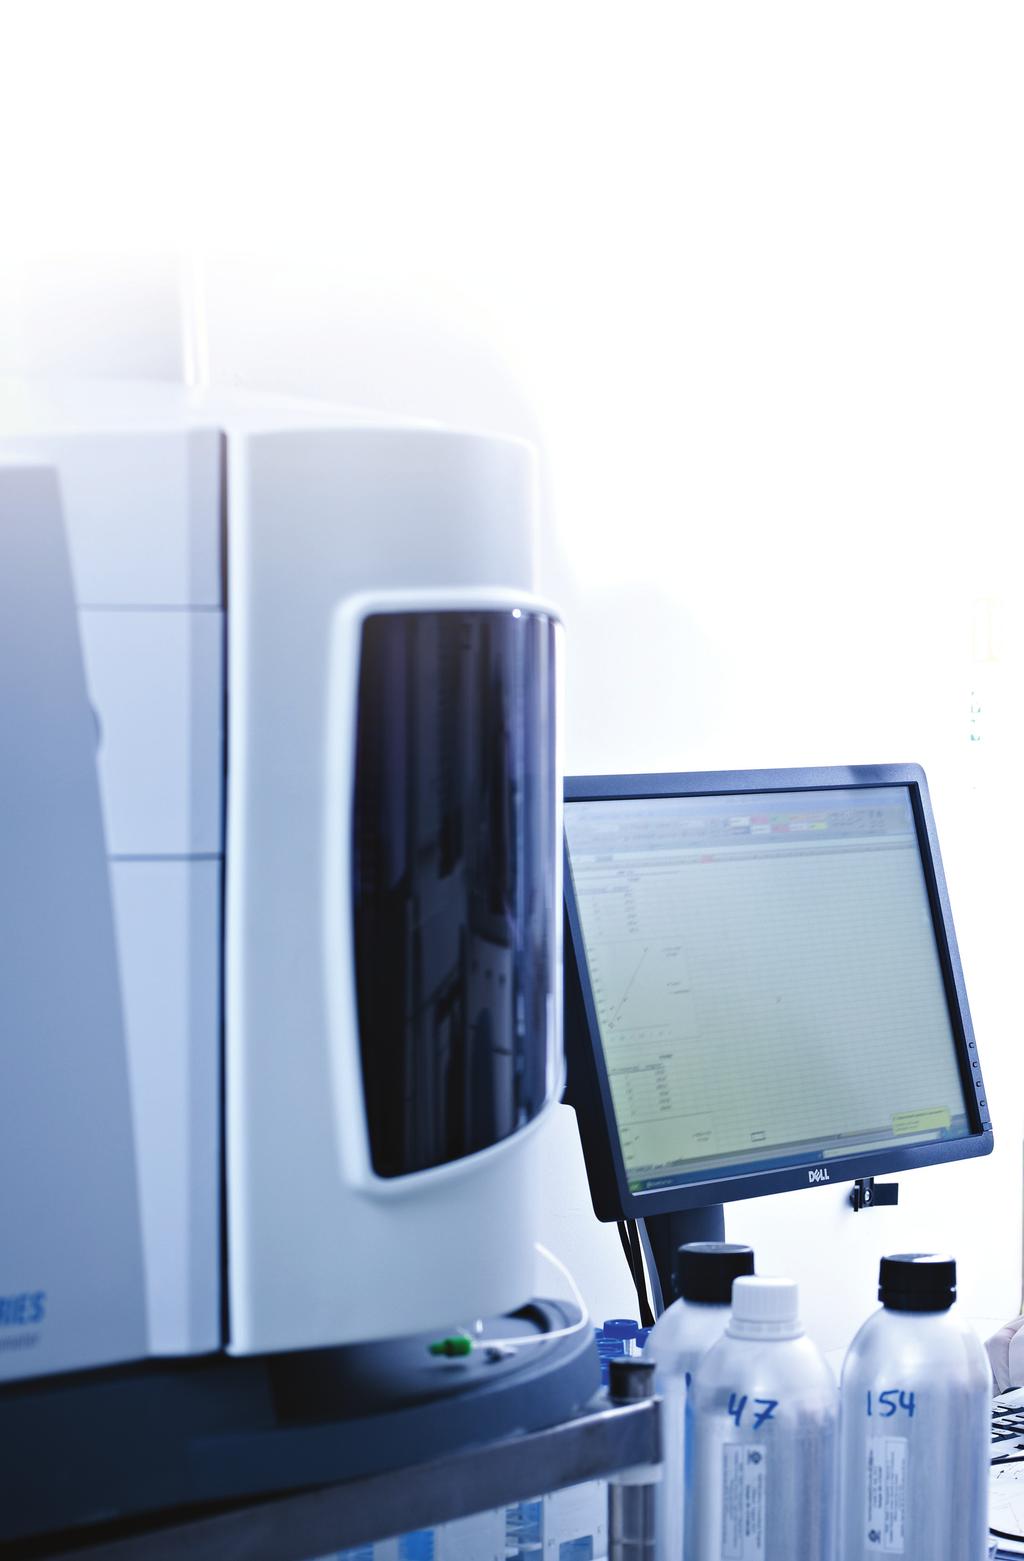 ICP-OES and ICP-MS driven by Qtegra Intelligent Scientific Data Solution The innovative icap 7000 Series ICP-OES is driven by a software solution to simplify the user